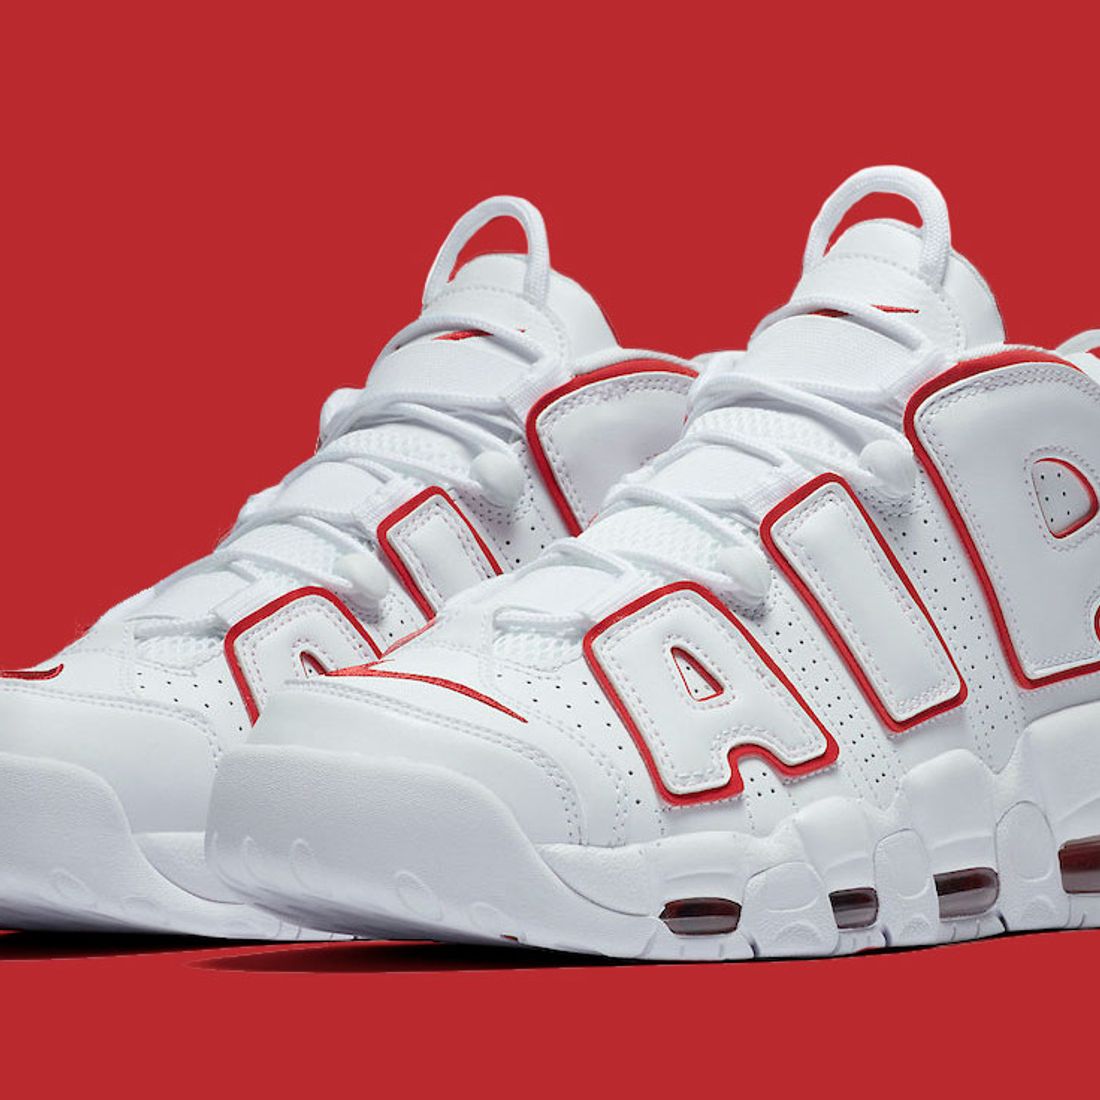 More Is Better: The Nike Air More Uptempo – Sneaker History - Podcasts,  Footwear News & Sneaker Culture